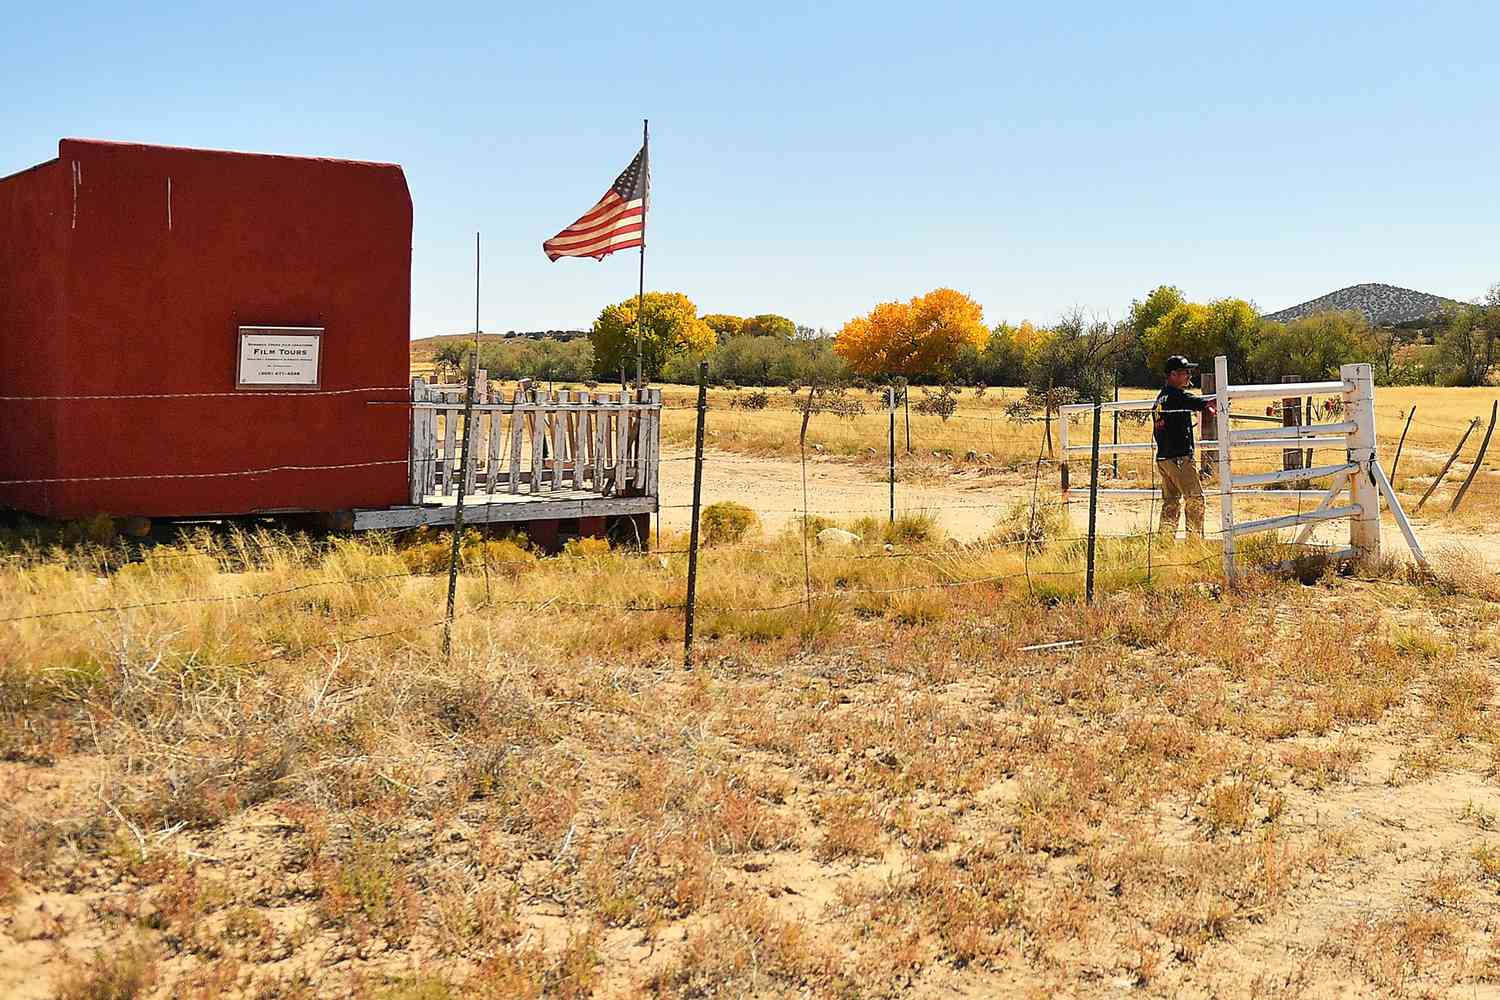 A vehicle from the Office of the Medical Investigator enters the front gate leading to the Bonanza Creek Ranch on October 22, 2021 in Santa Fe, New Mexico. Director of Photography Halyna Hutchins was killed and director Joel Souza was injured on set while filming the movie "Rust" at Bonanza Creek Ranch near Santa Fe, New Mexico on October 21, 2021. The film's star and producer Alec Baldwin discharged a prop firearm that hit Hutchins and Souza.